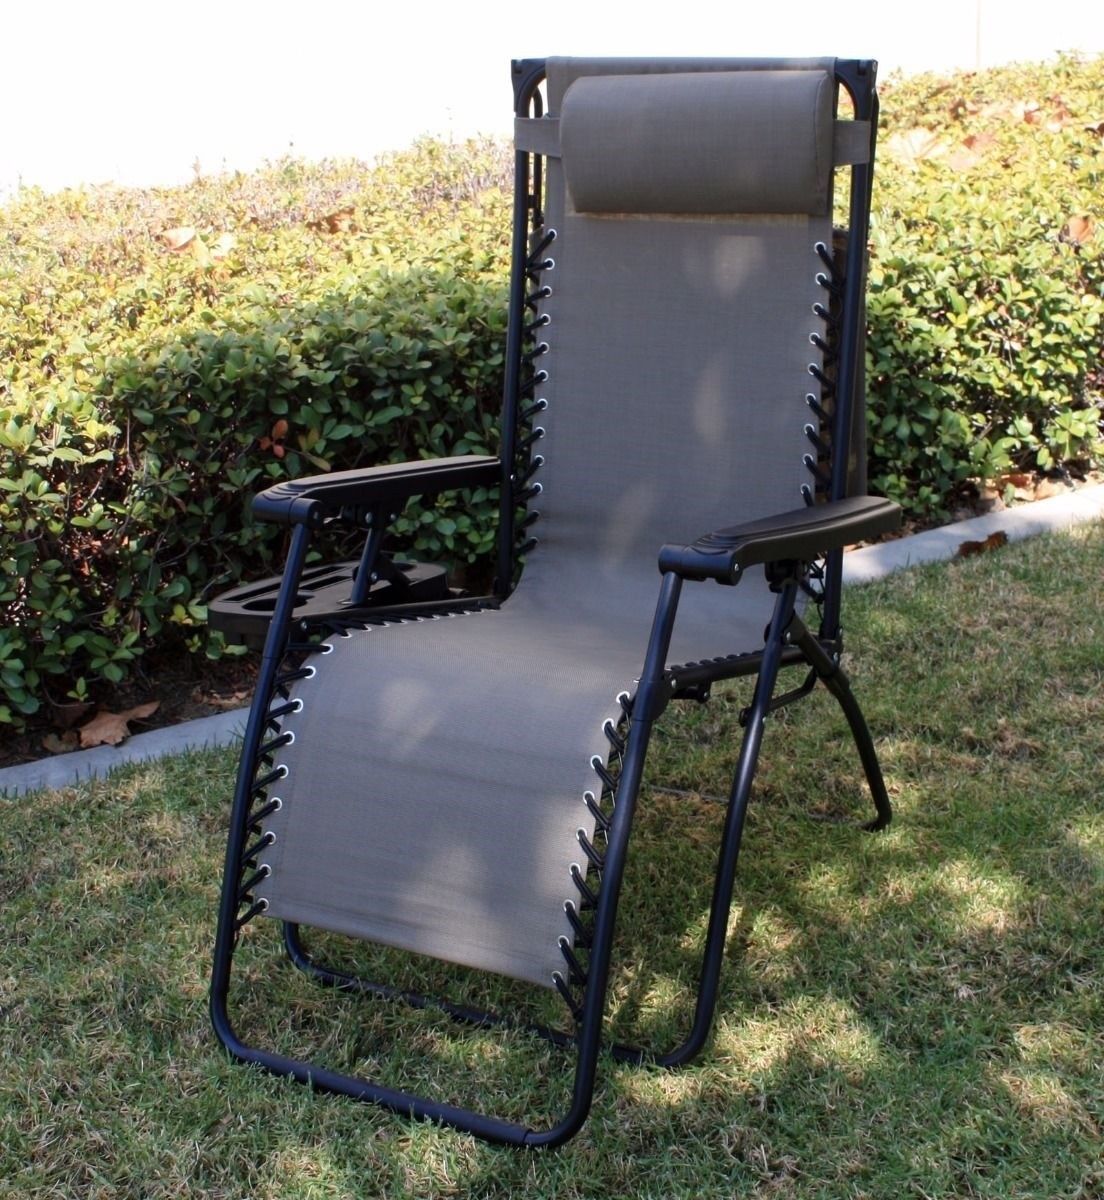 OutDoor Folding Recliner Zero Gravity Lounge Chair W Shade Canopy Cup Holder 311683199119 5.JPG